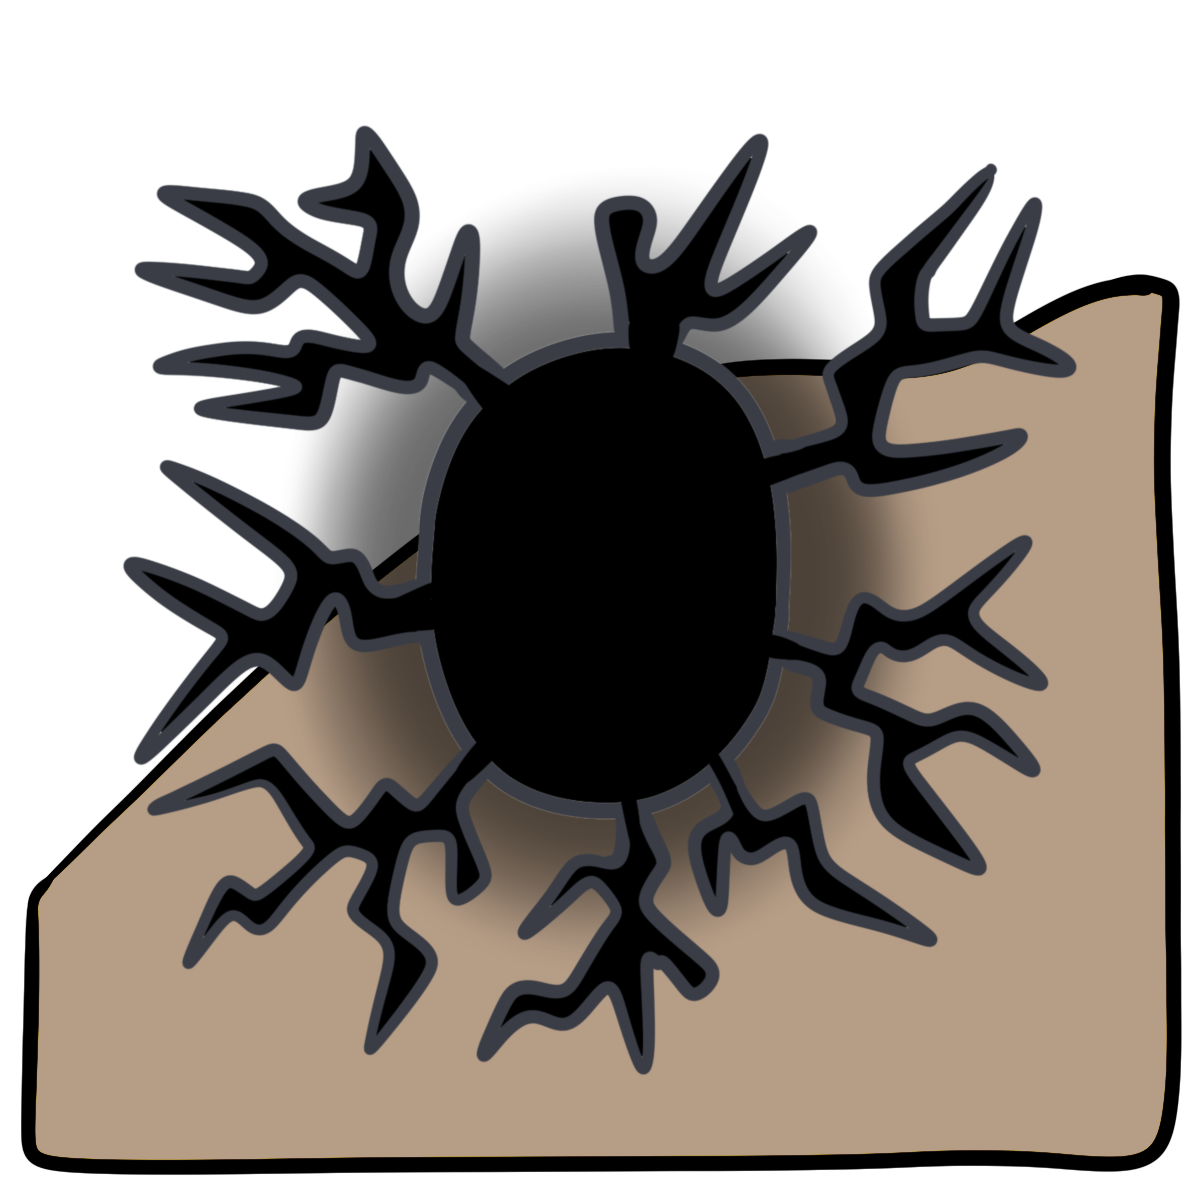 A black glowing oval with branching pointy lines coming from its sides. Curved beige skin fills the bottom half of the background.